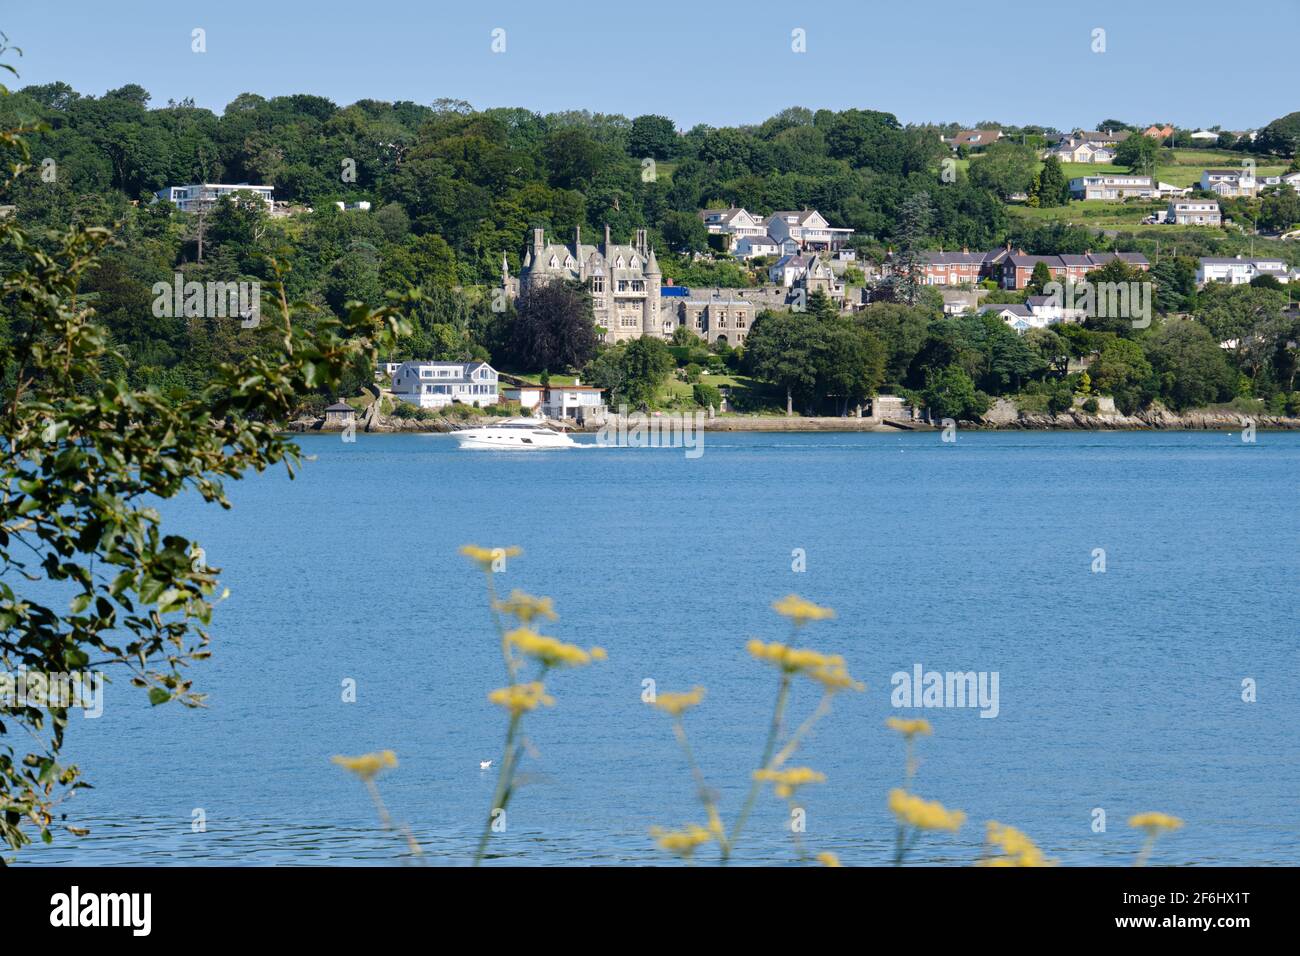 A large luxury motorboat crosses in front of Château Rhianfa along the Menai Strait, Wales Stock Photo